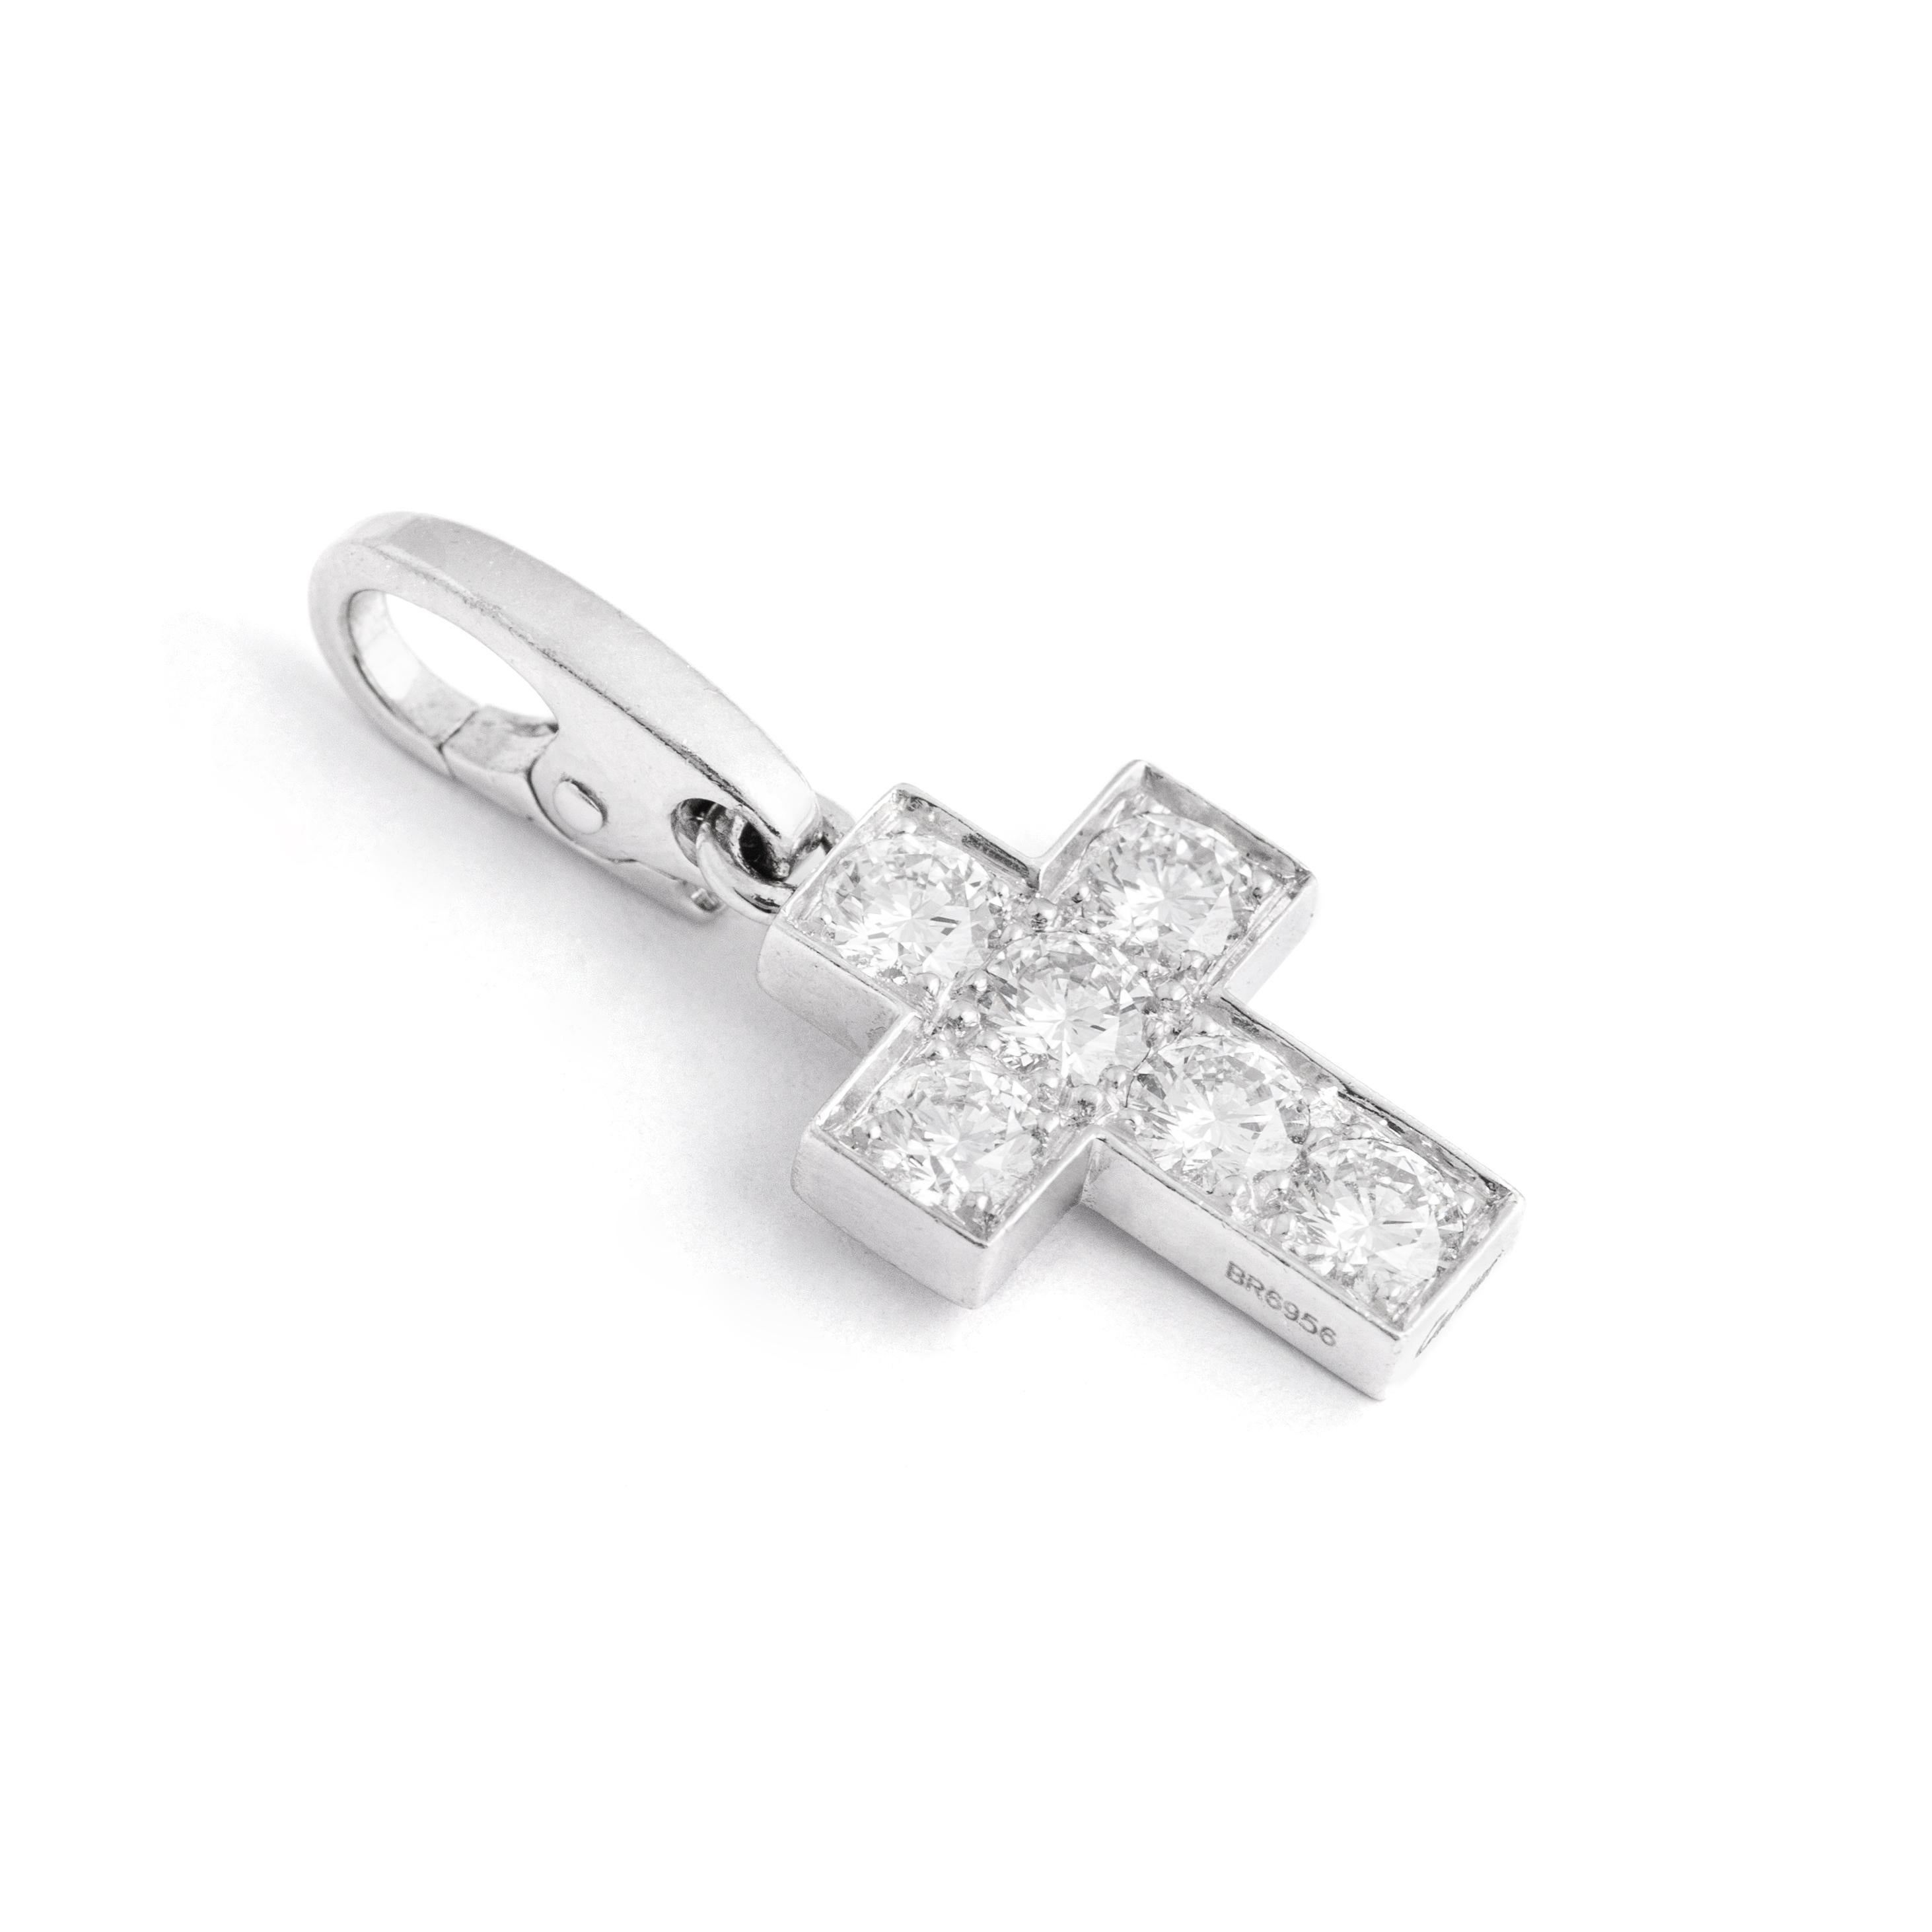 Cartier Diamond on White Gold 18K Cross Pendant Charm.
A stylish 18k white gold Cartier diamond pendant charm representing a Cross. The pendant is set with round brilliant cut diamonds, G color and VS clarity. 

Signed Cartier, numbered and